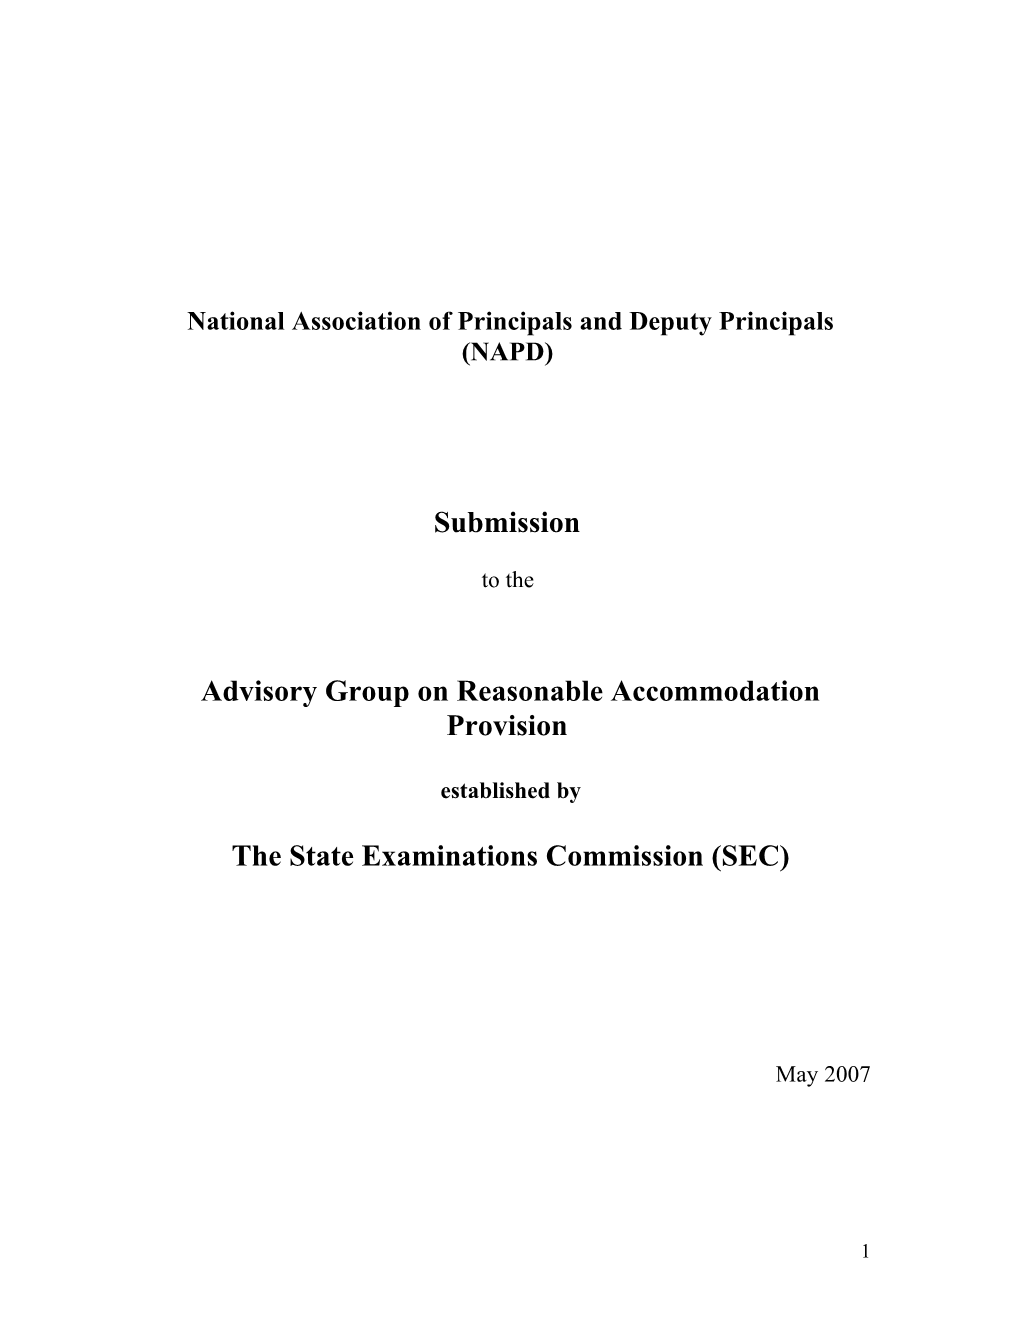 Submission to the Advisory Group on Reasonable Accommodation Provision for Candidates In